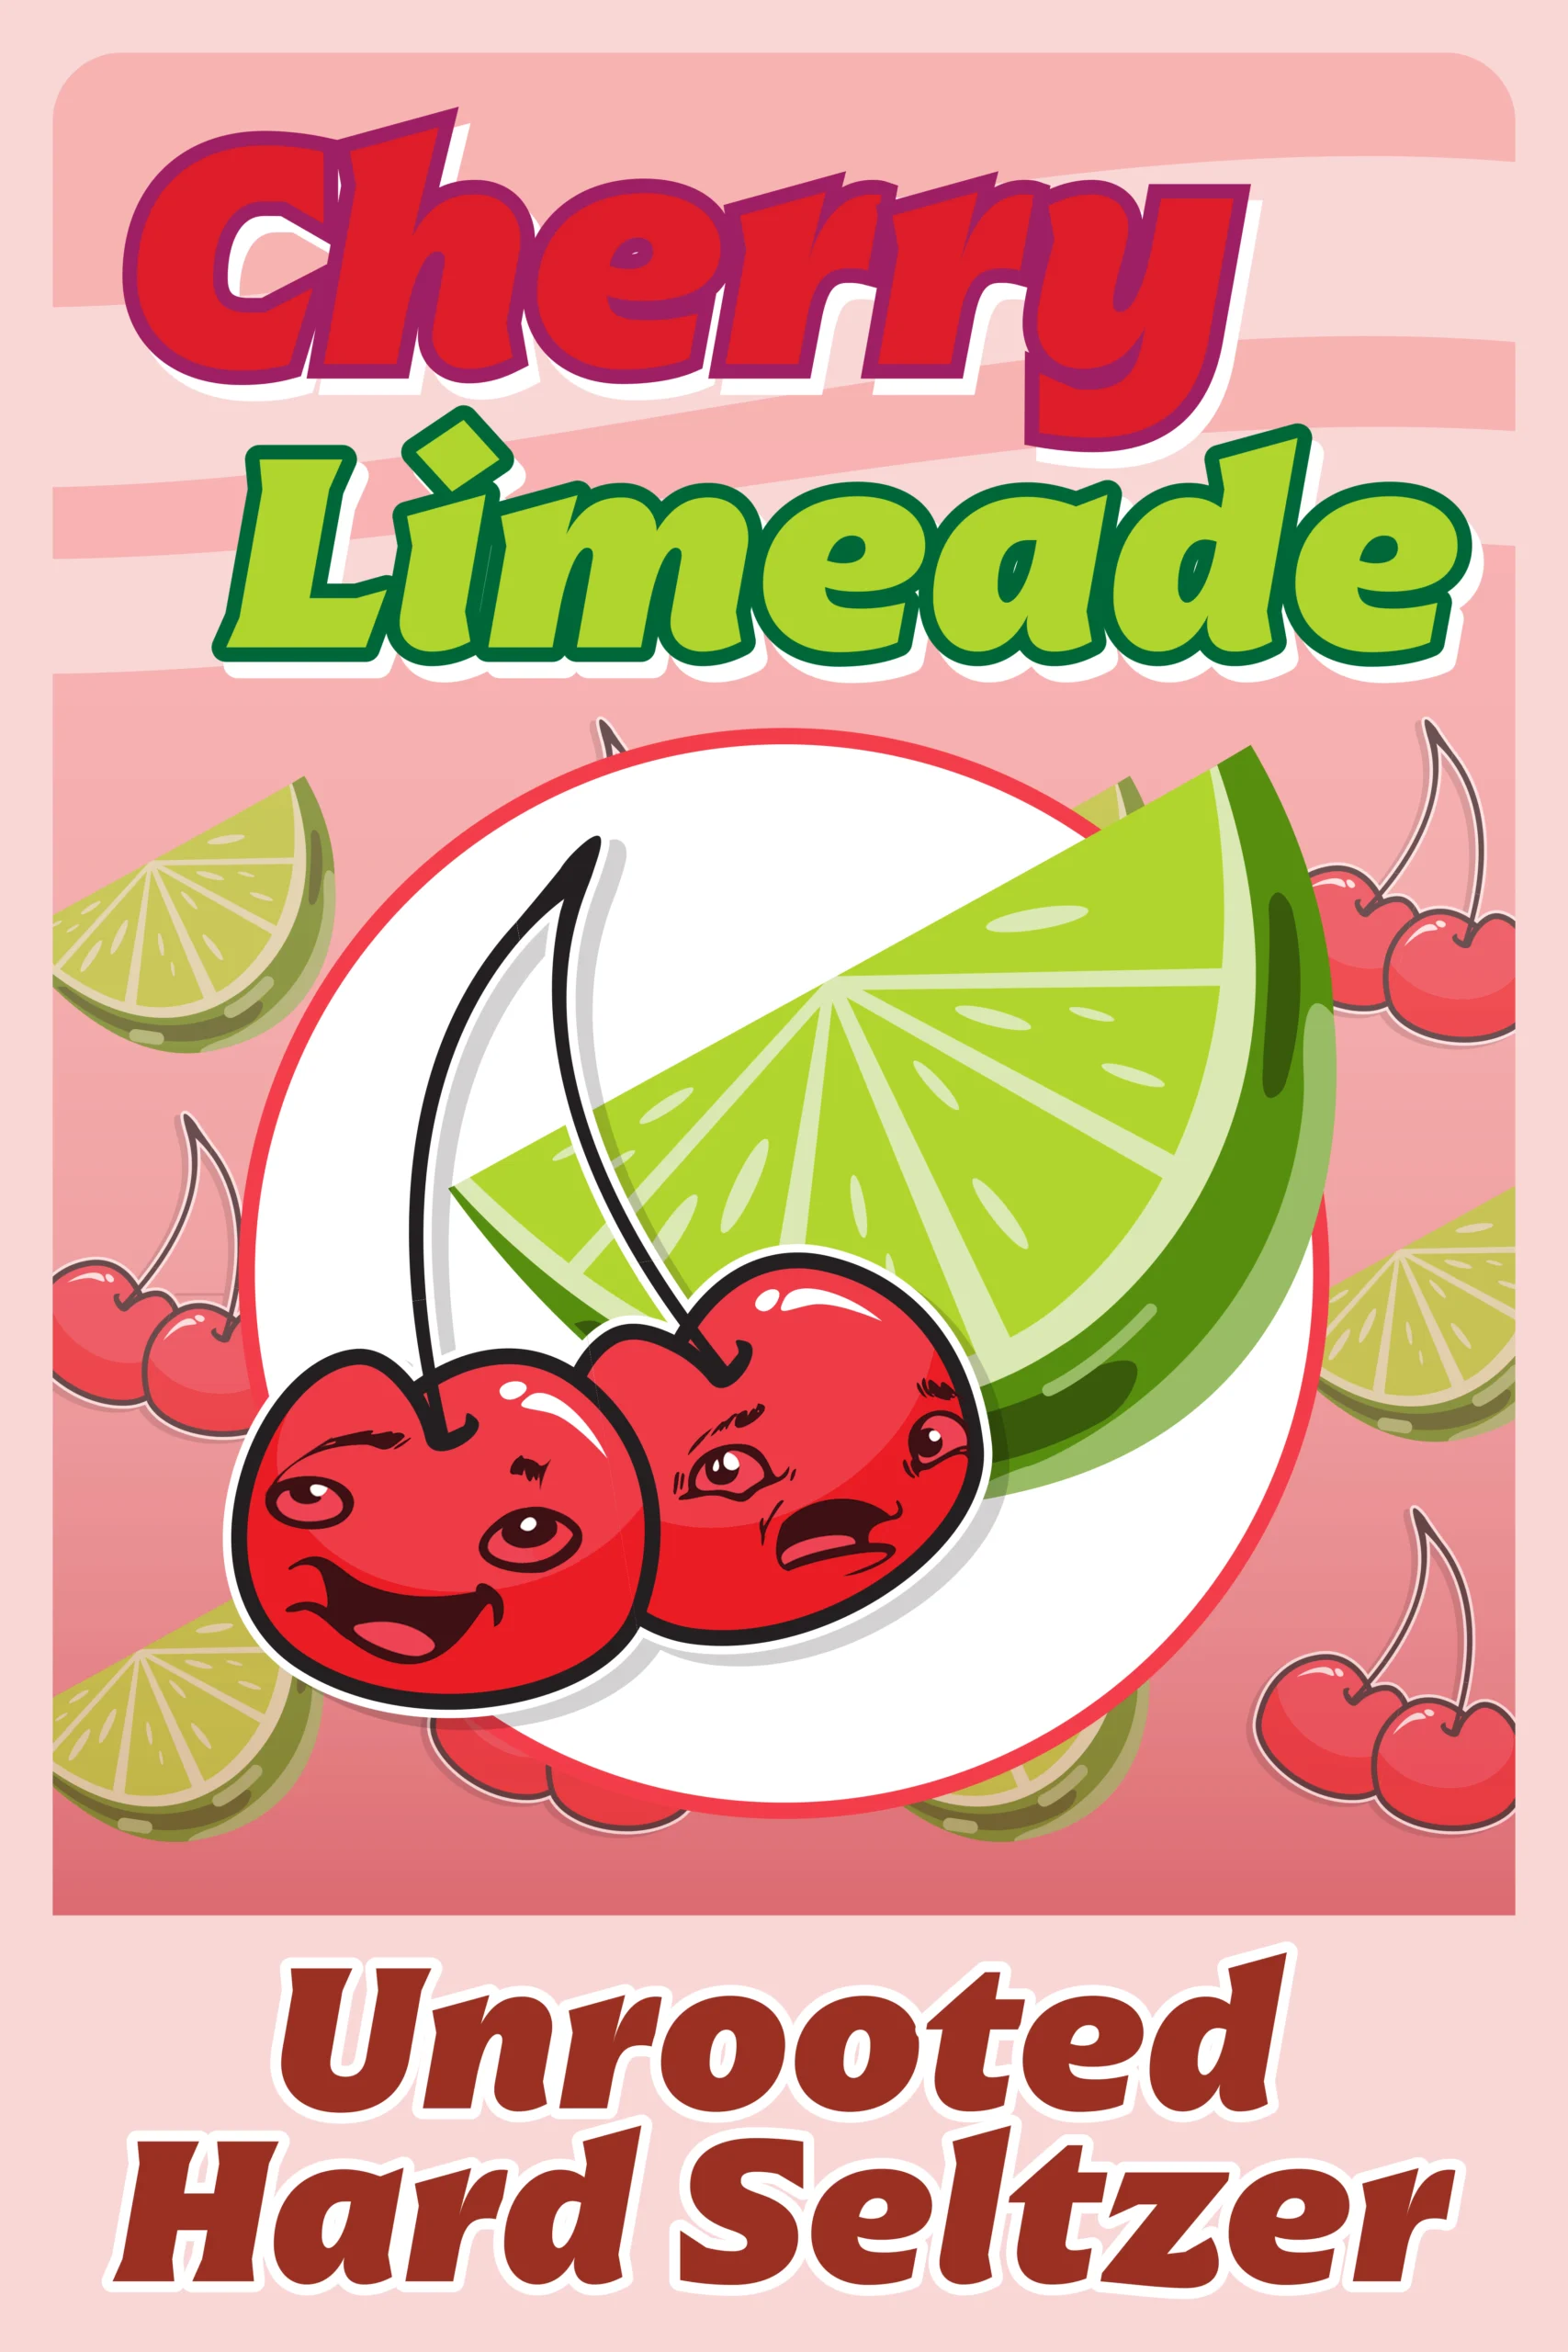 Poster representing the beverage CHERRY LIMEADE, a HARD SELTZER with an alcohol content of 5%, available on tap at Transplants Brewing